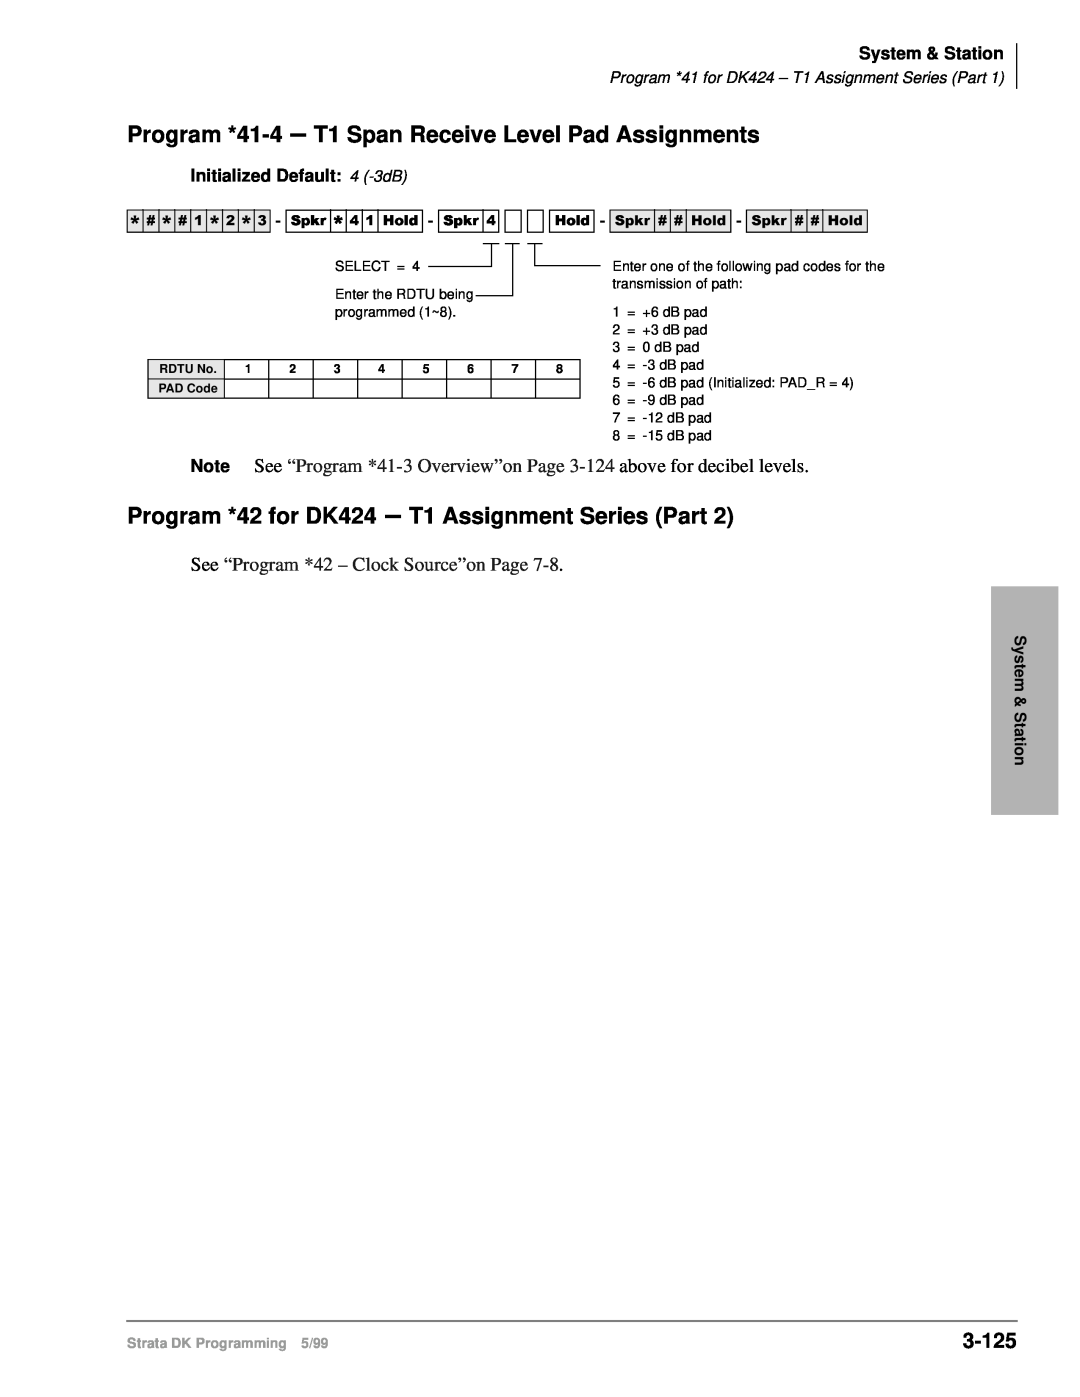 Toshiba dk14 manual Program *42 for DK424 - T1 Assignment Series Part, 3-125, See “Program *42 – Clock Source”on Page 